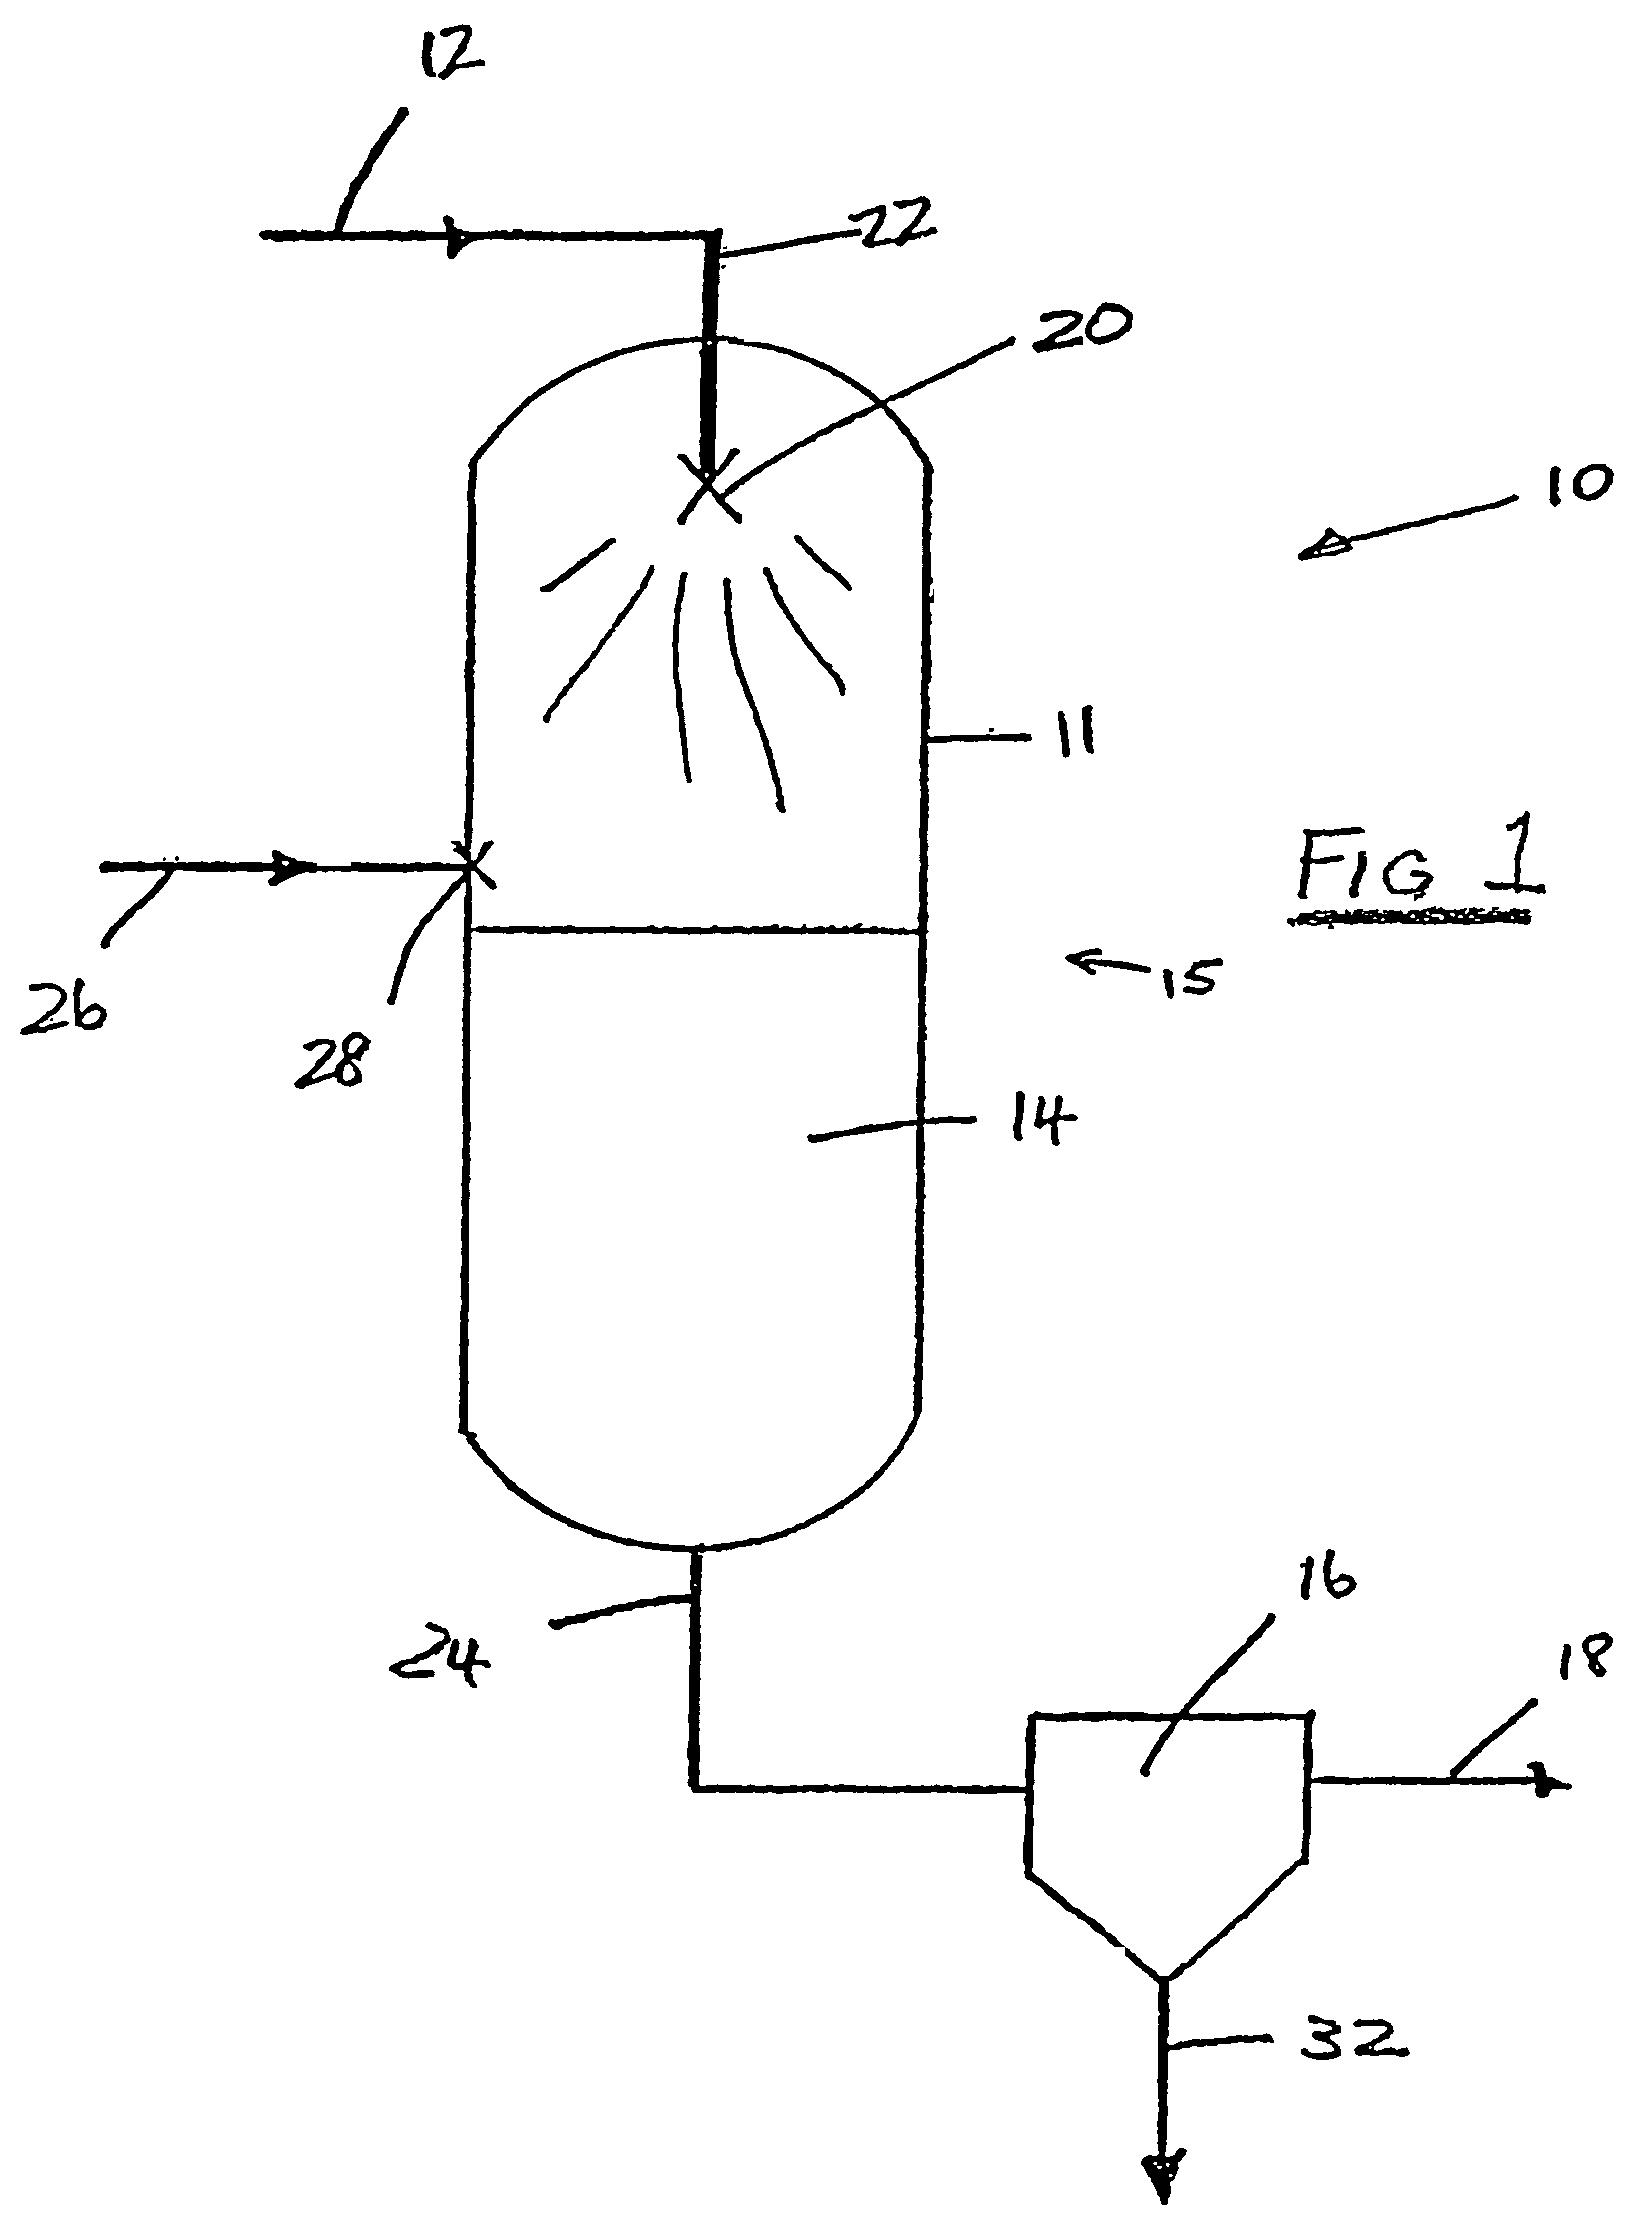 Process and device for production of LNG by removal of freezable solids